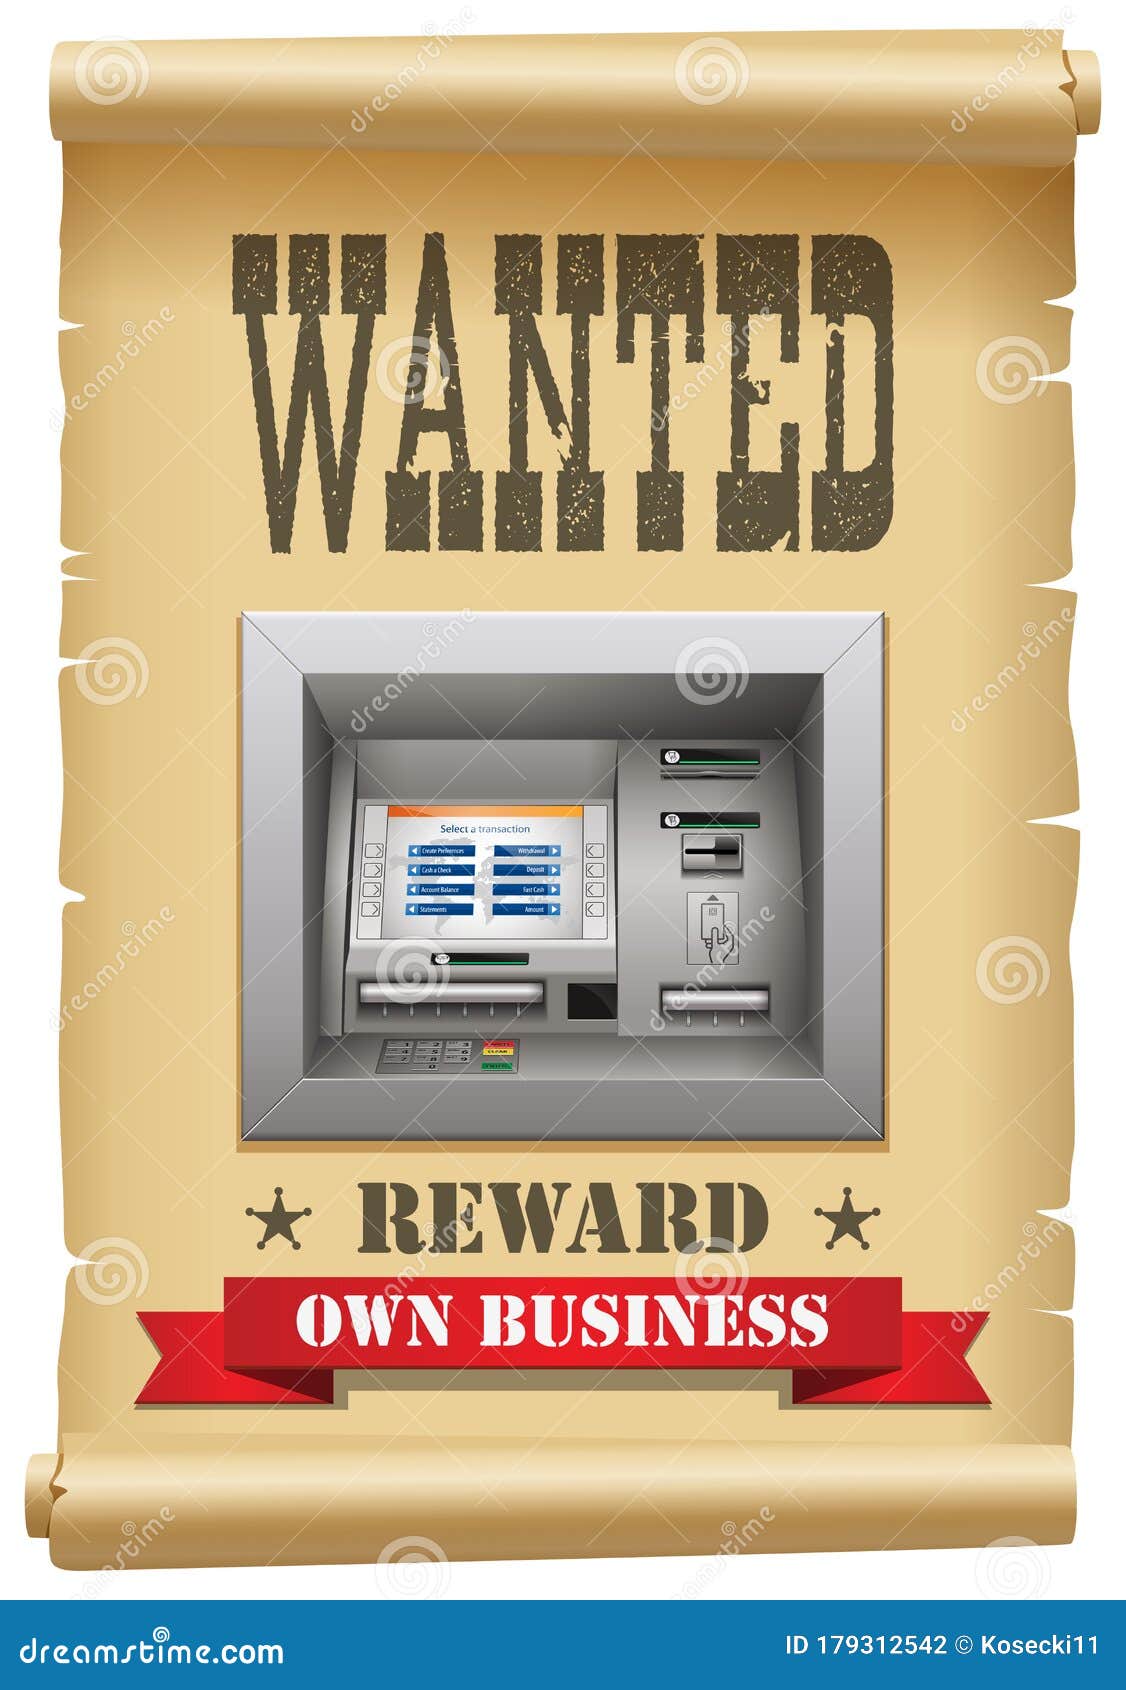 cash wanted concept - atm  automated teller machine on arrest warrant - cash you need for own business